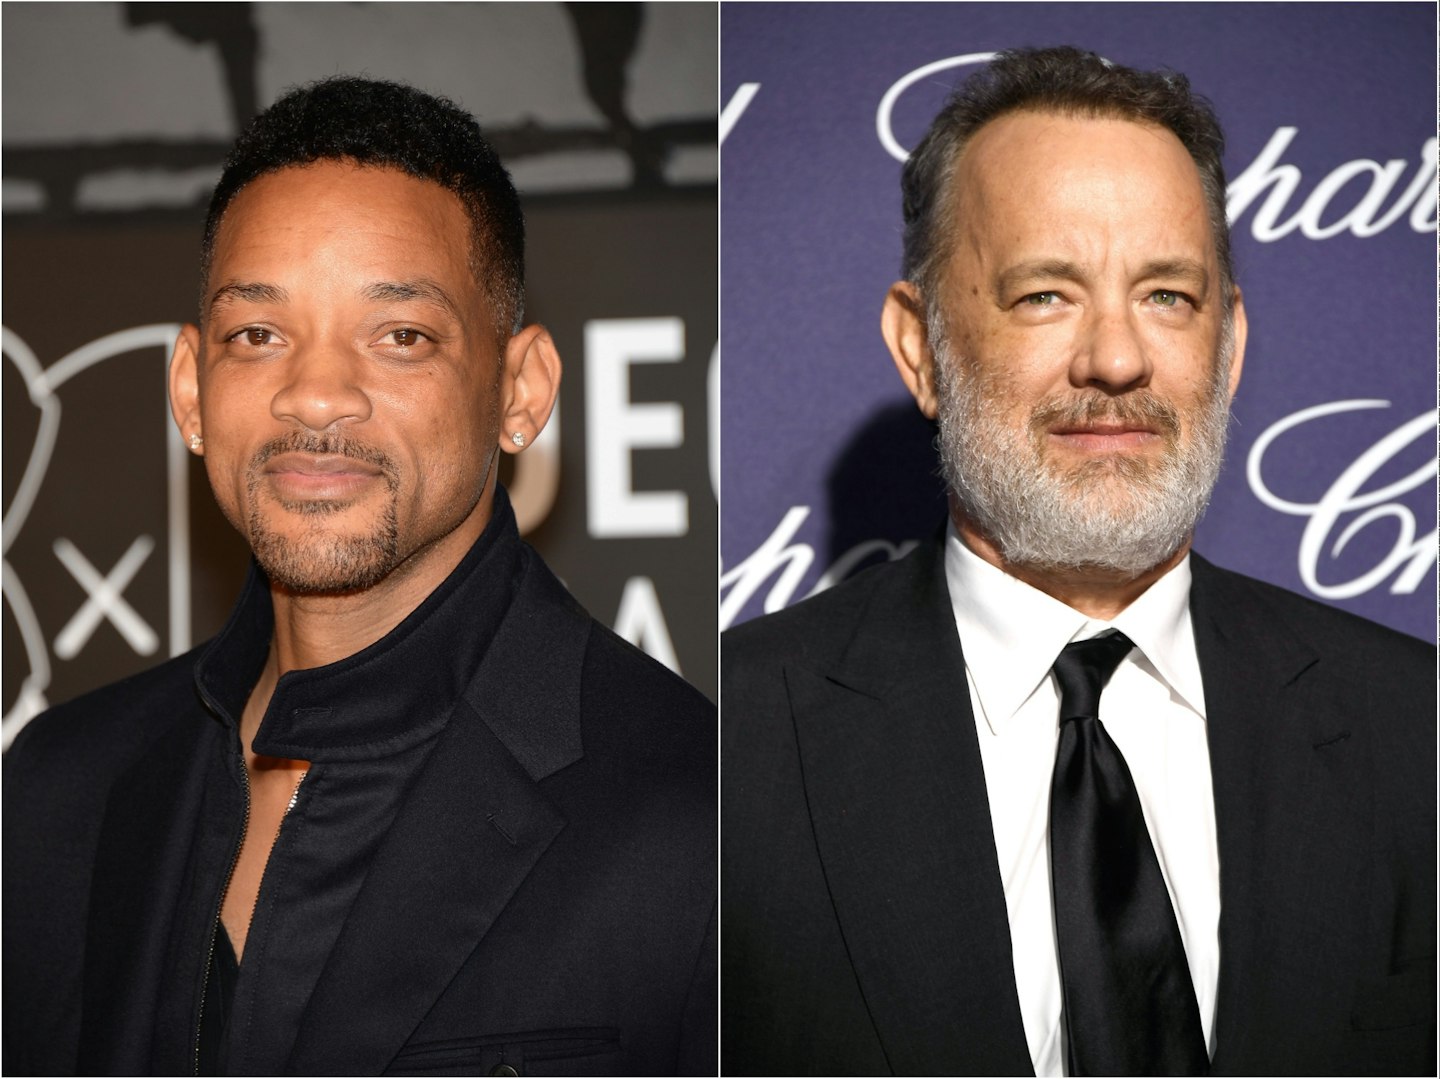 Will Smith and Tom Hanks